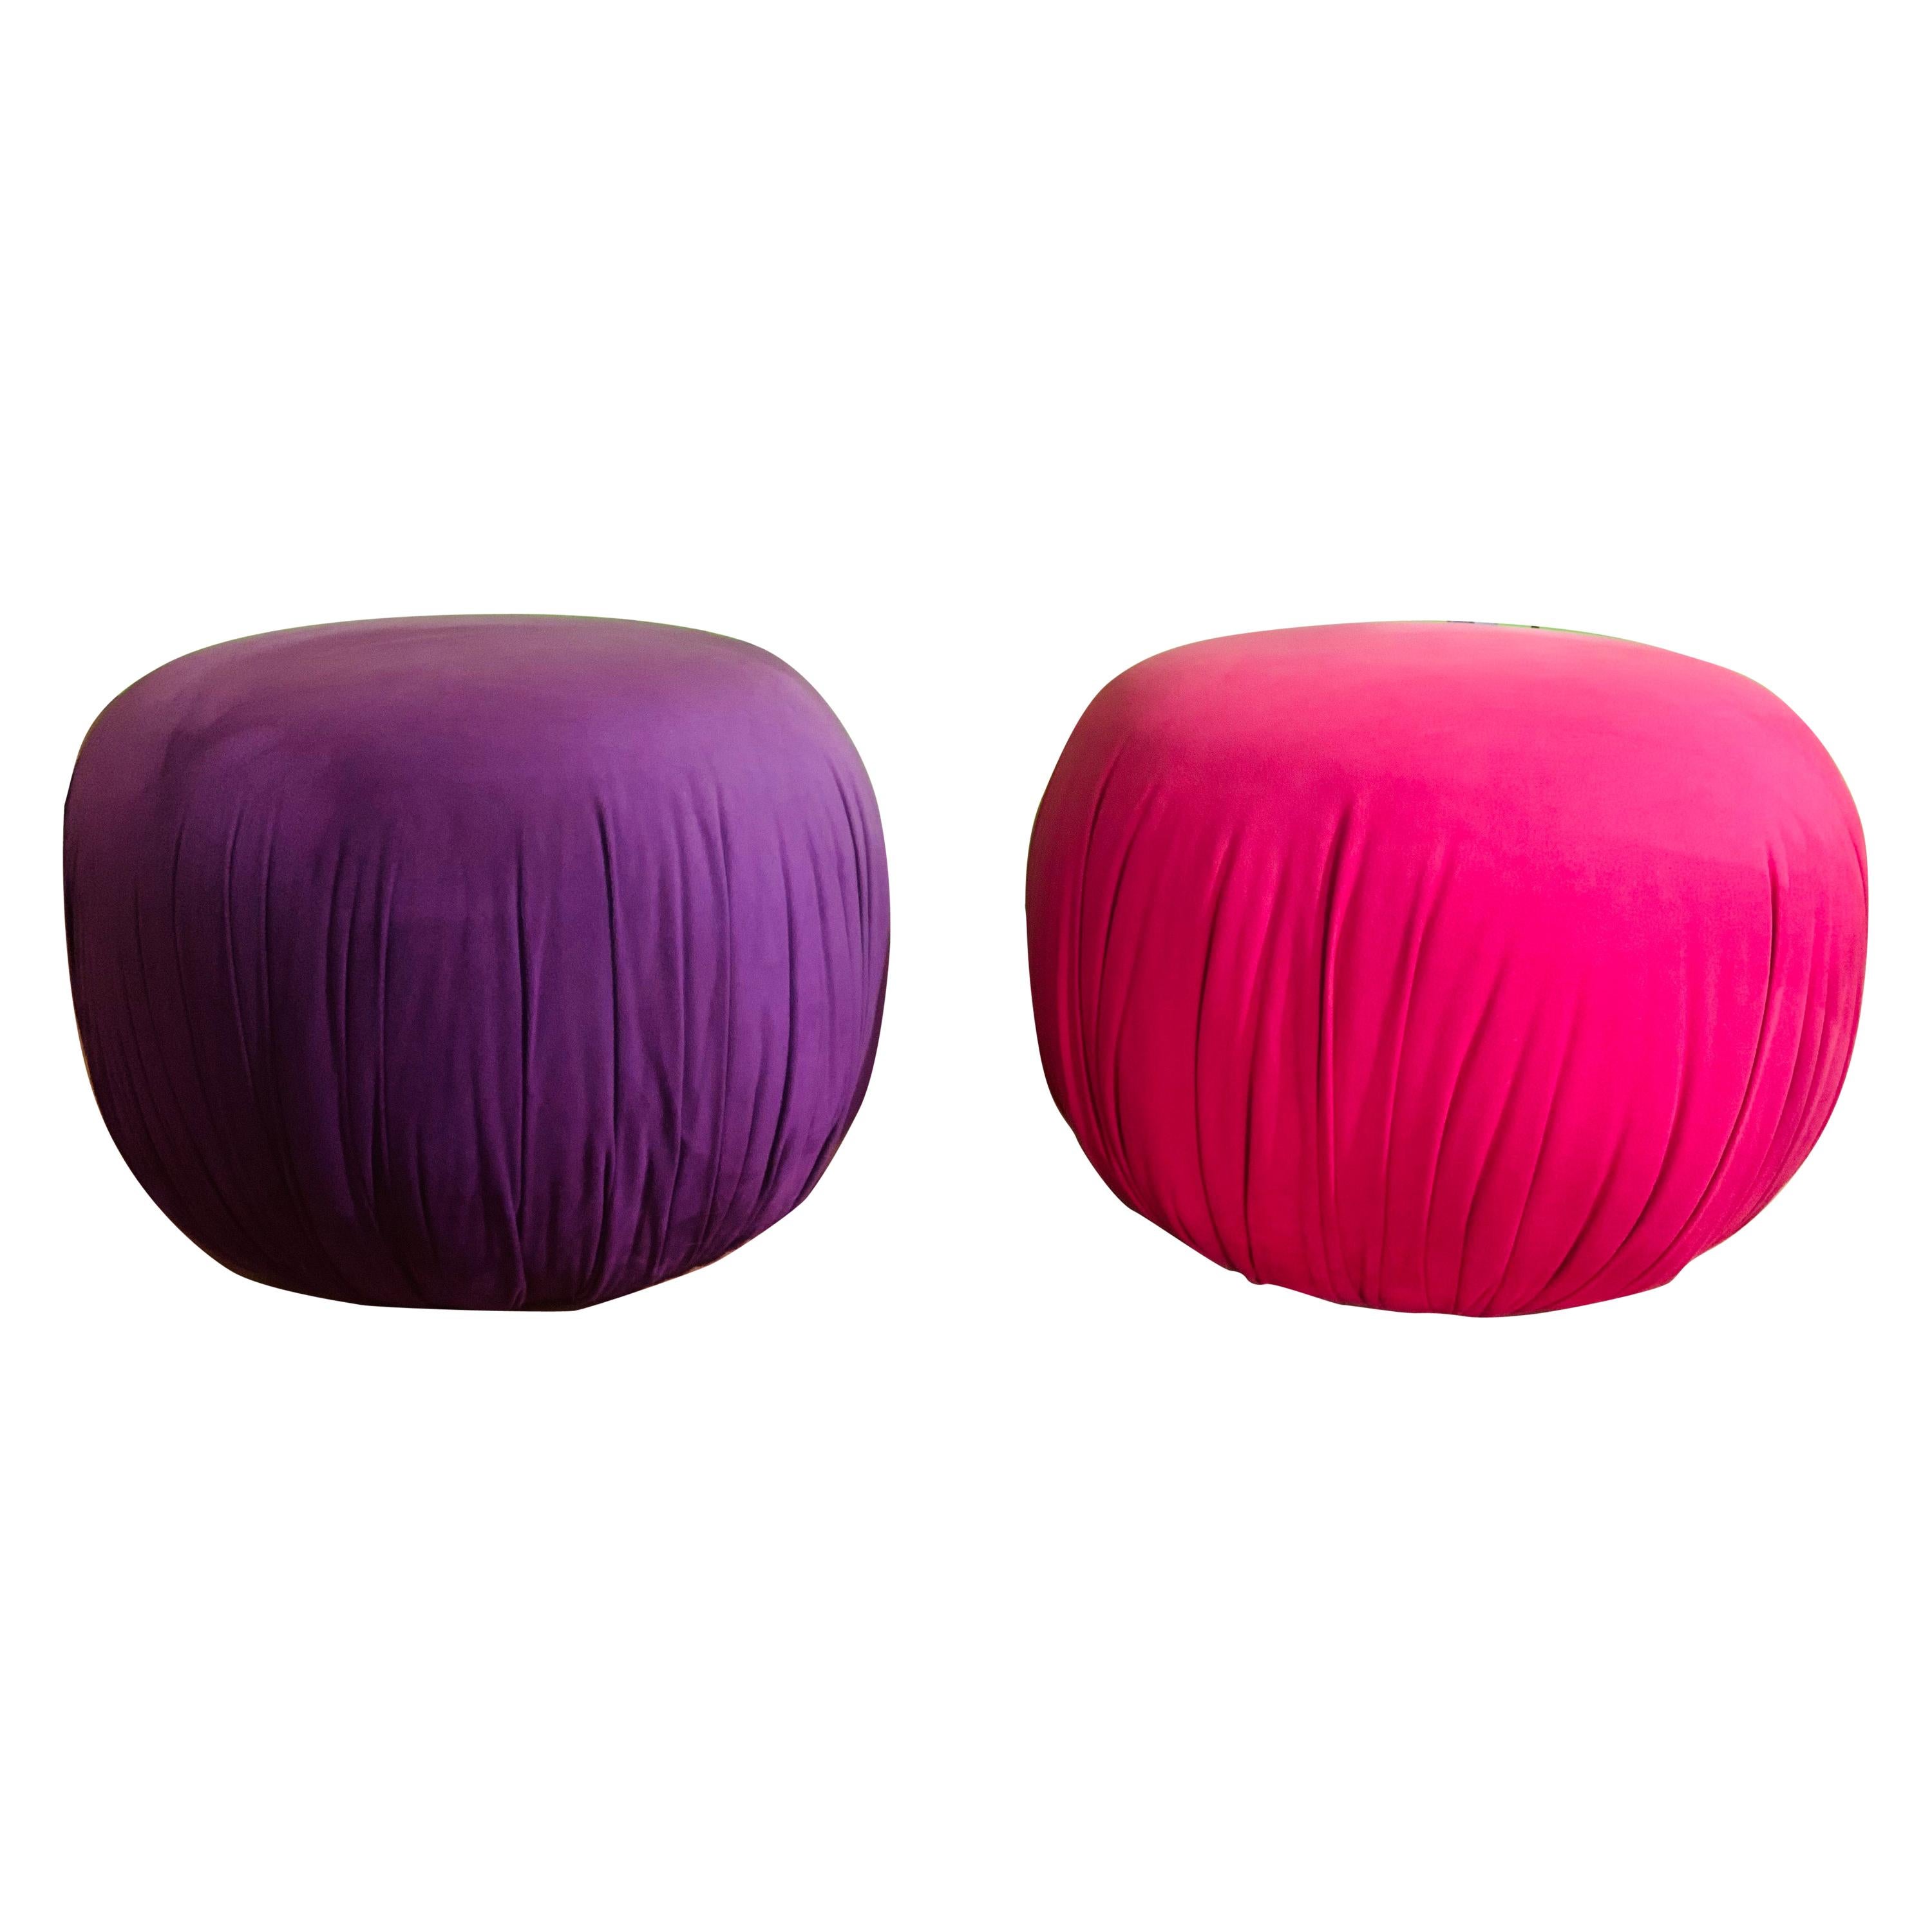 Postmodern Poof Ottomans by Vladimir Kagan for Directional, A Pair